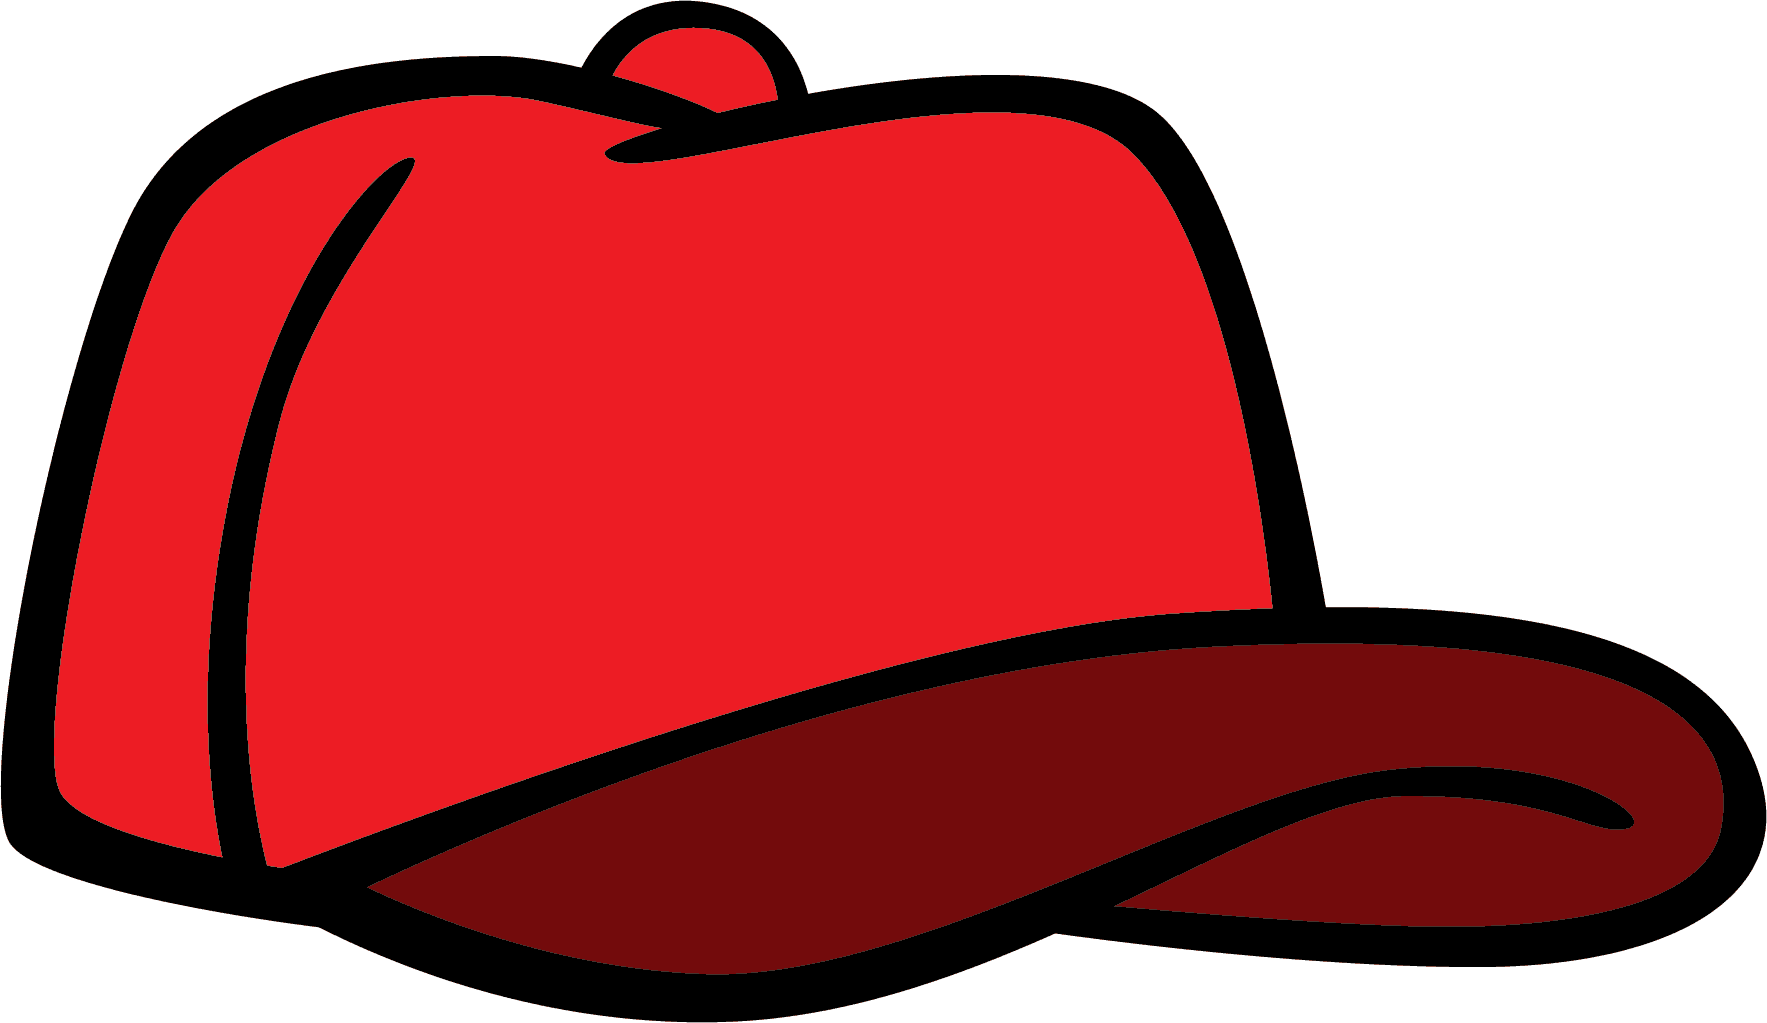 Red Hat Clip Art Free - ClipArt Best